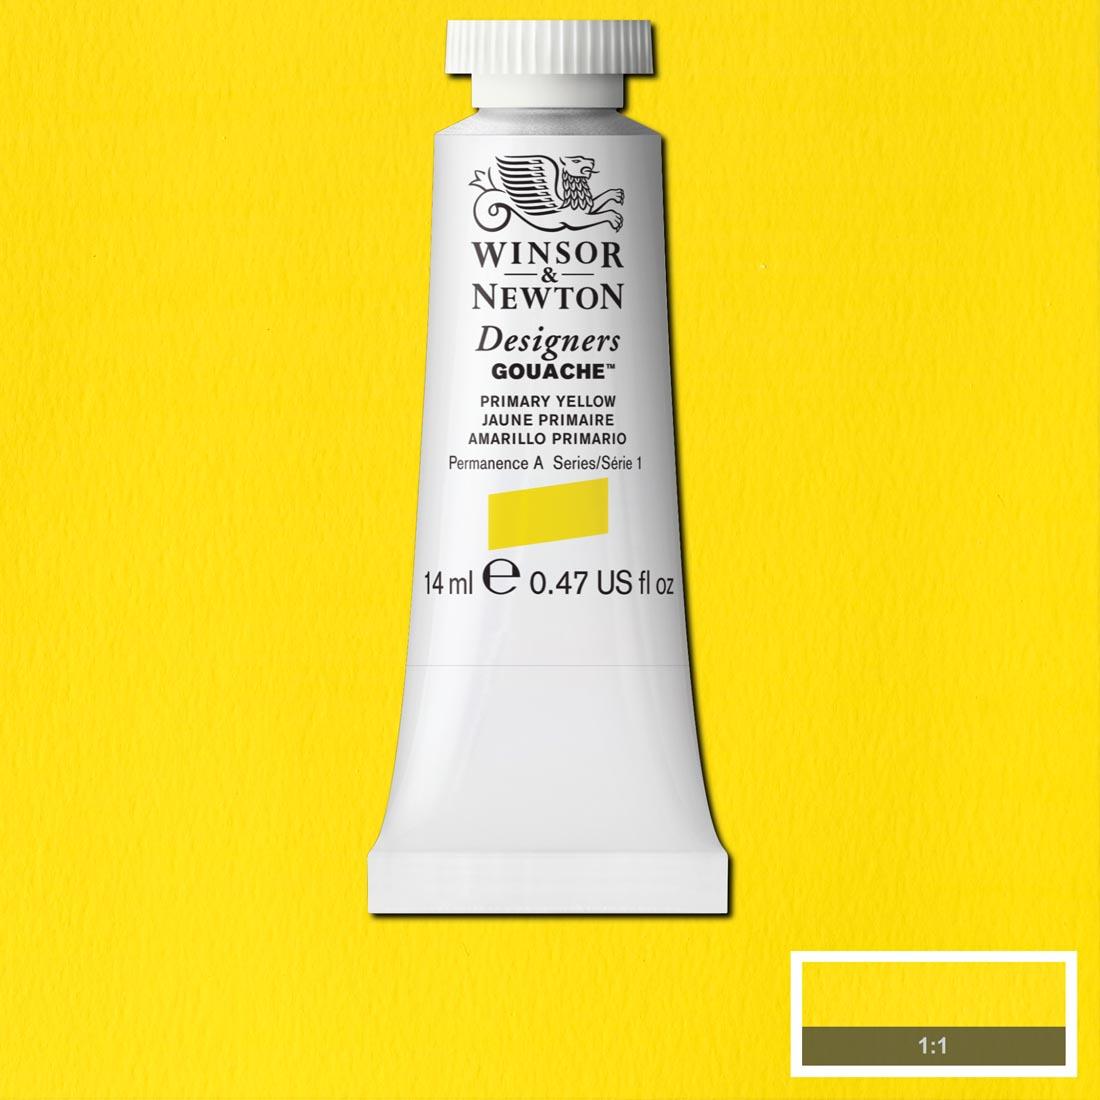 Tube of Primary Yellow Winsor & Newton Designers Gouache with a paint swatch for the background